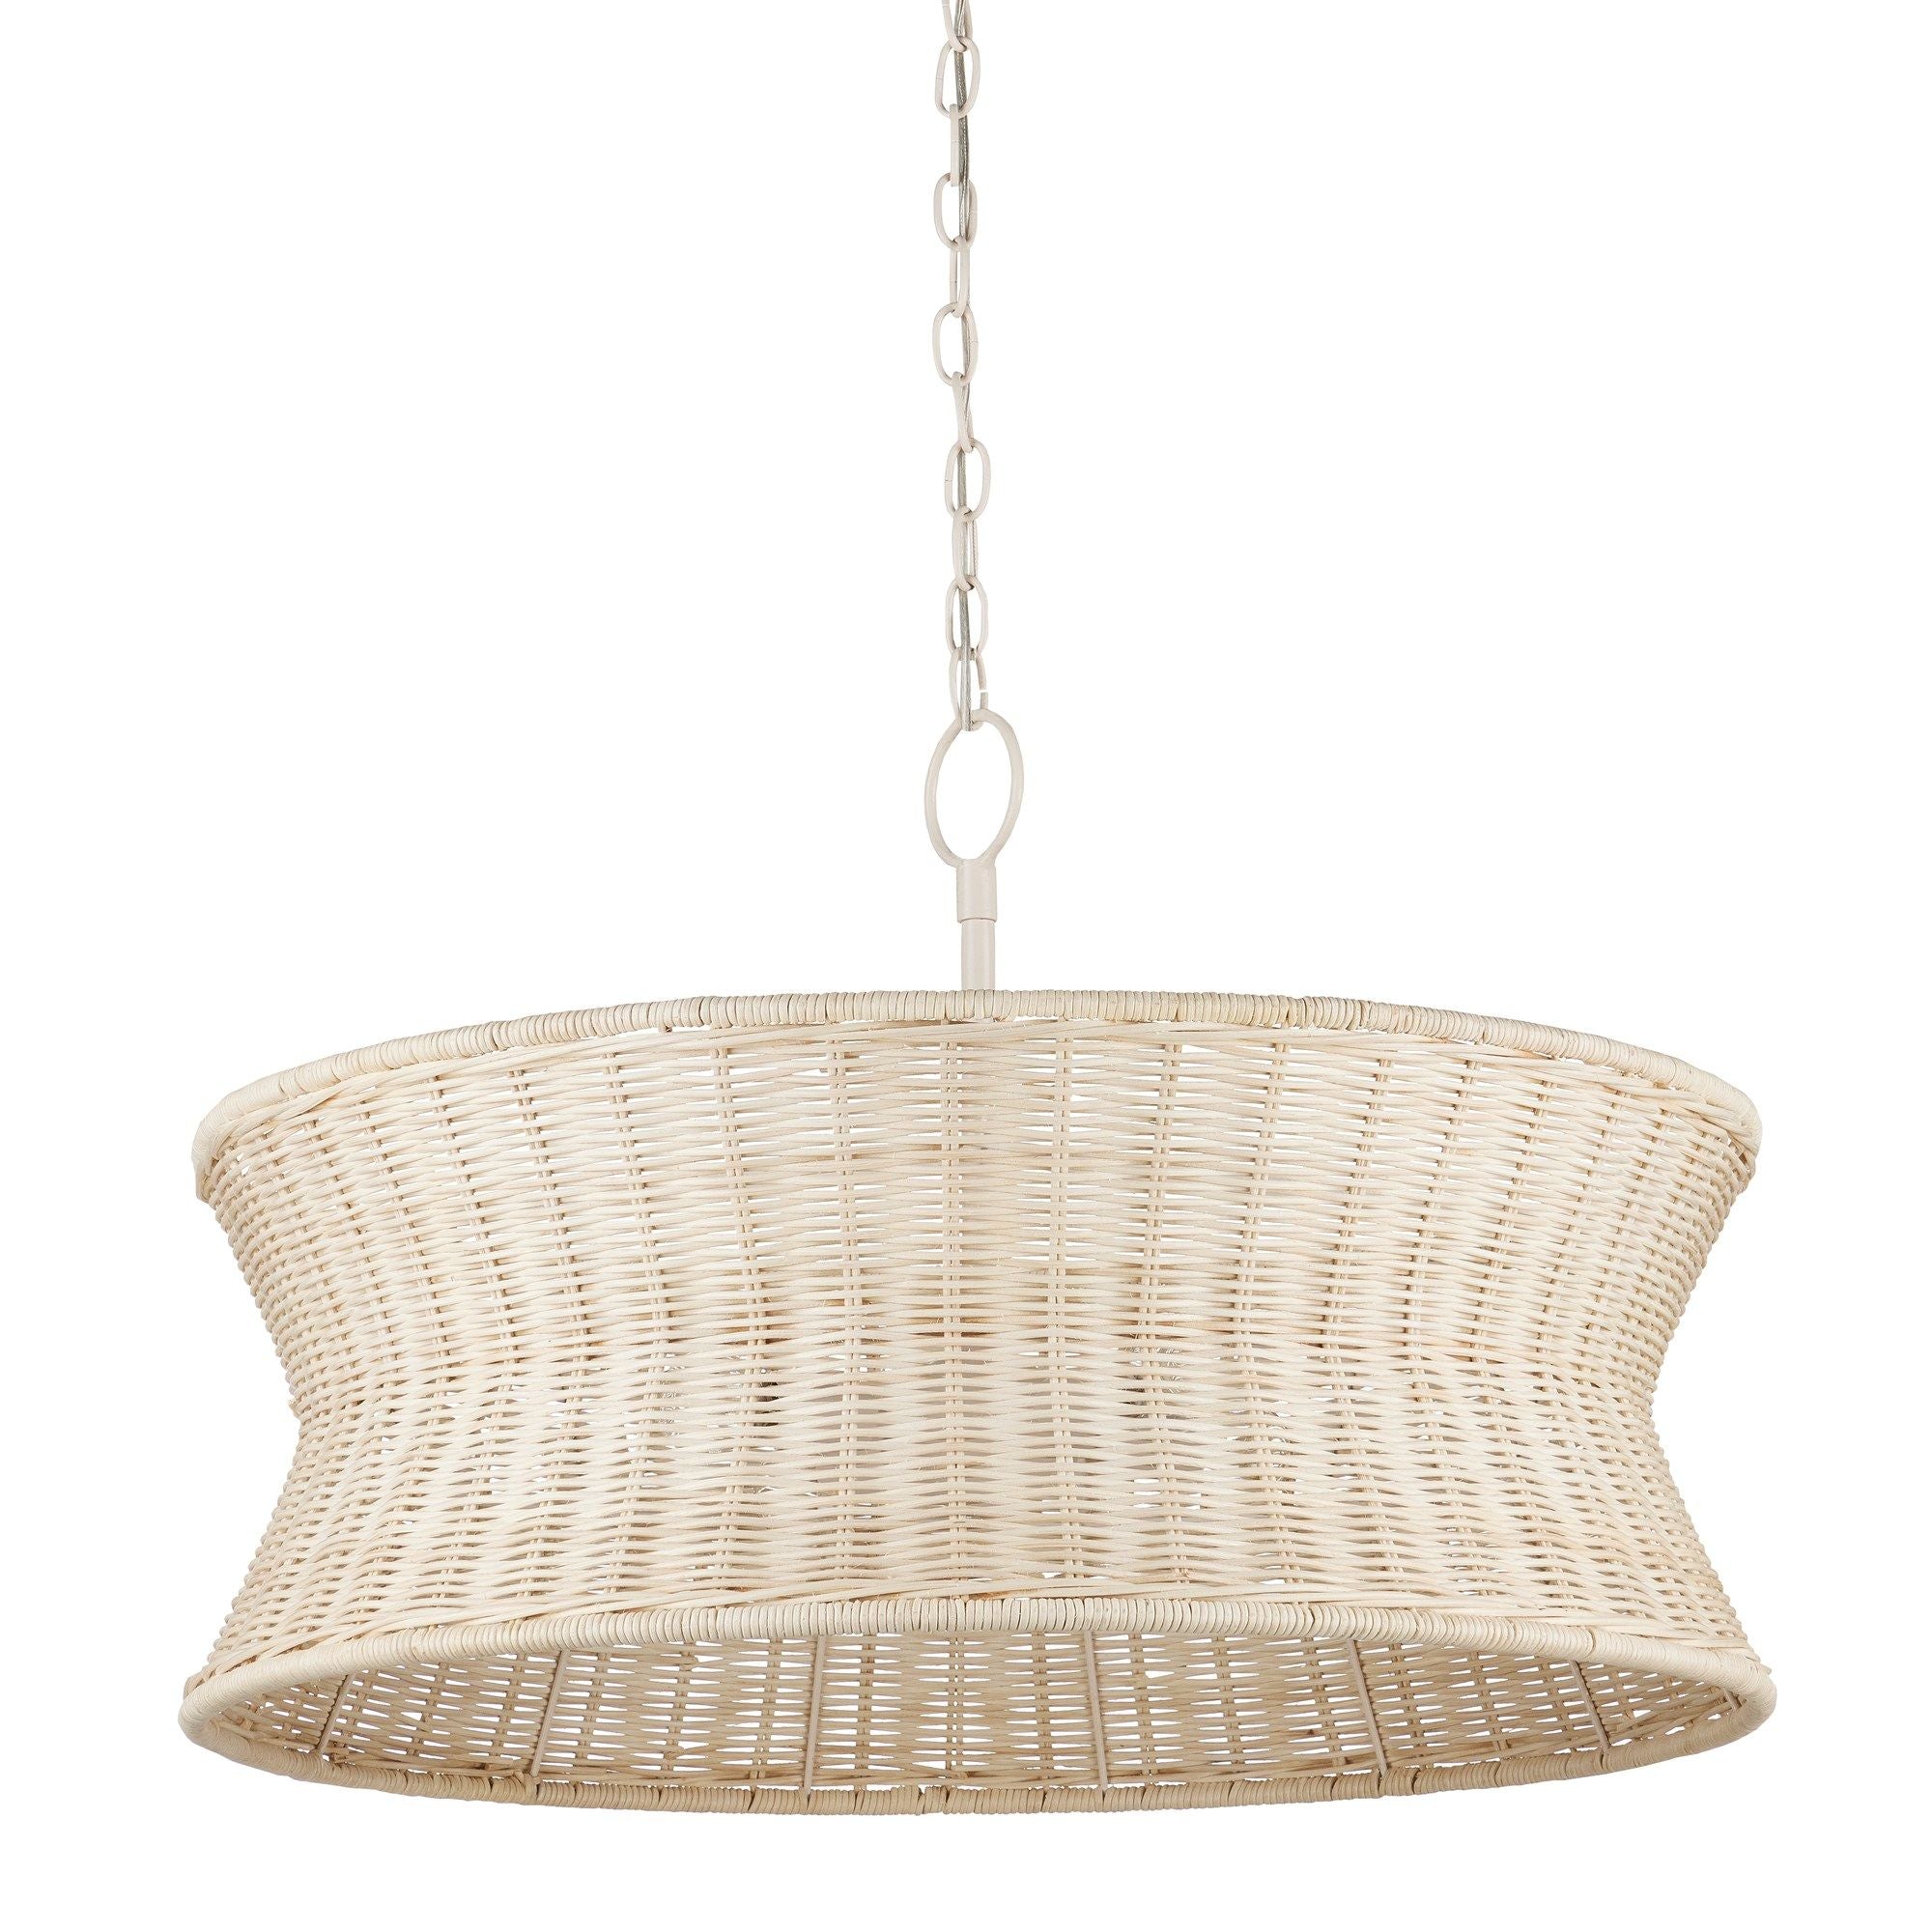 Phebe Small Rattan Chandelier - Bleached Natural/Vanilla